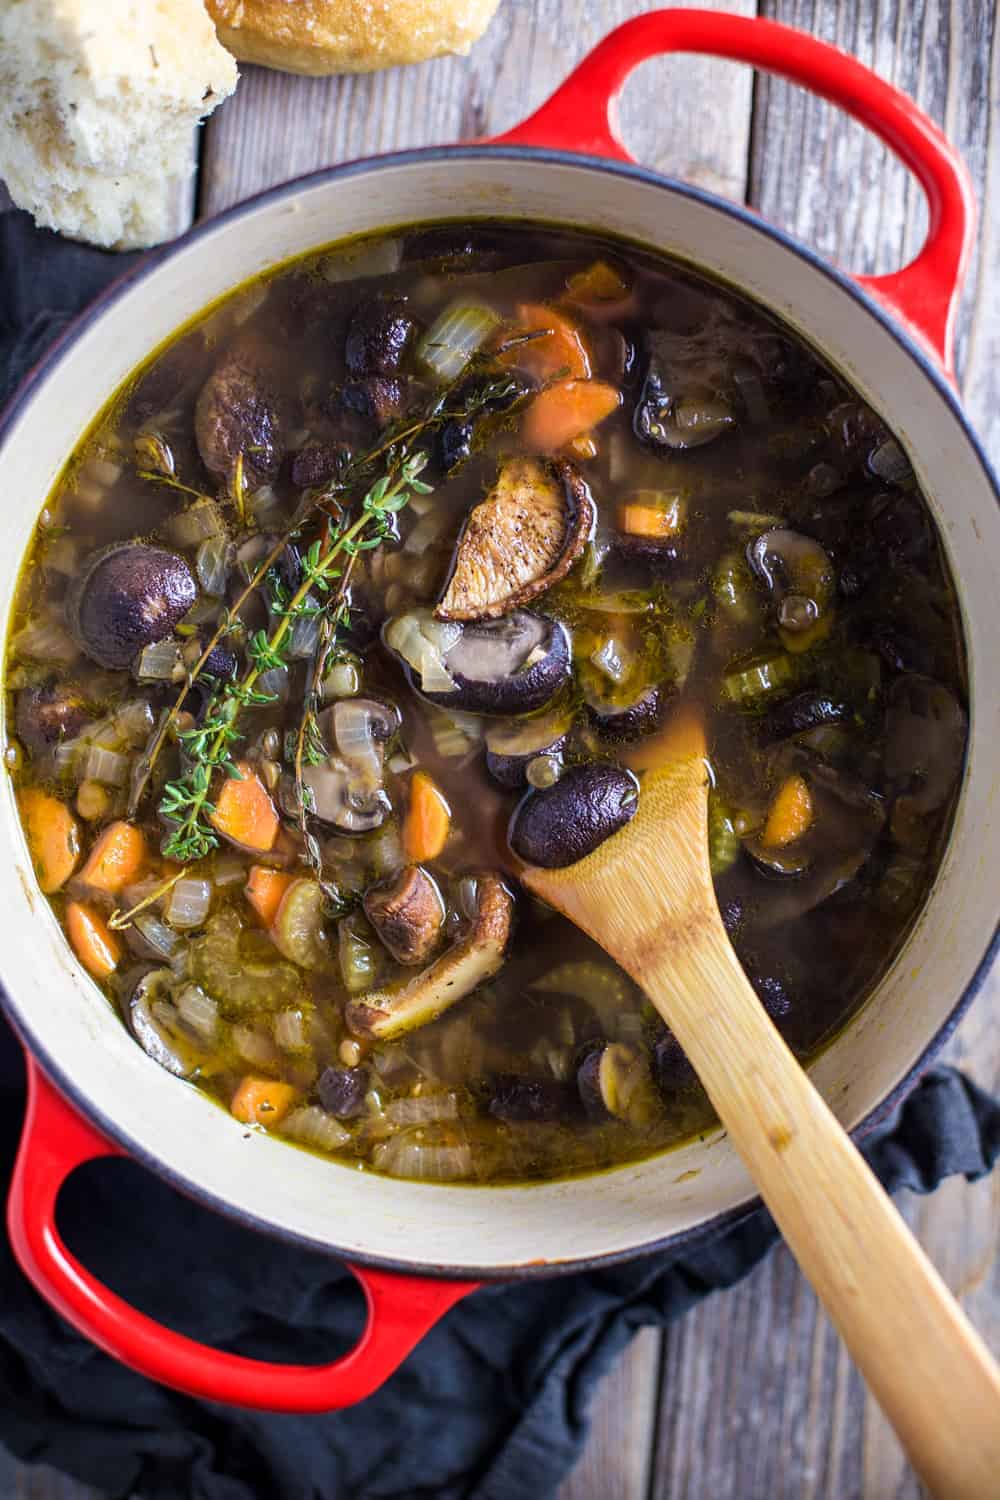 A Pot of Lentil Soup with Smoked Mushrooms